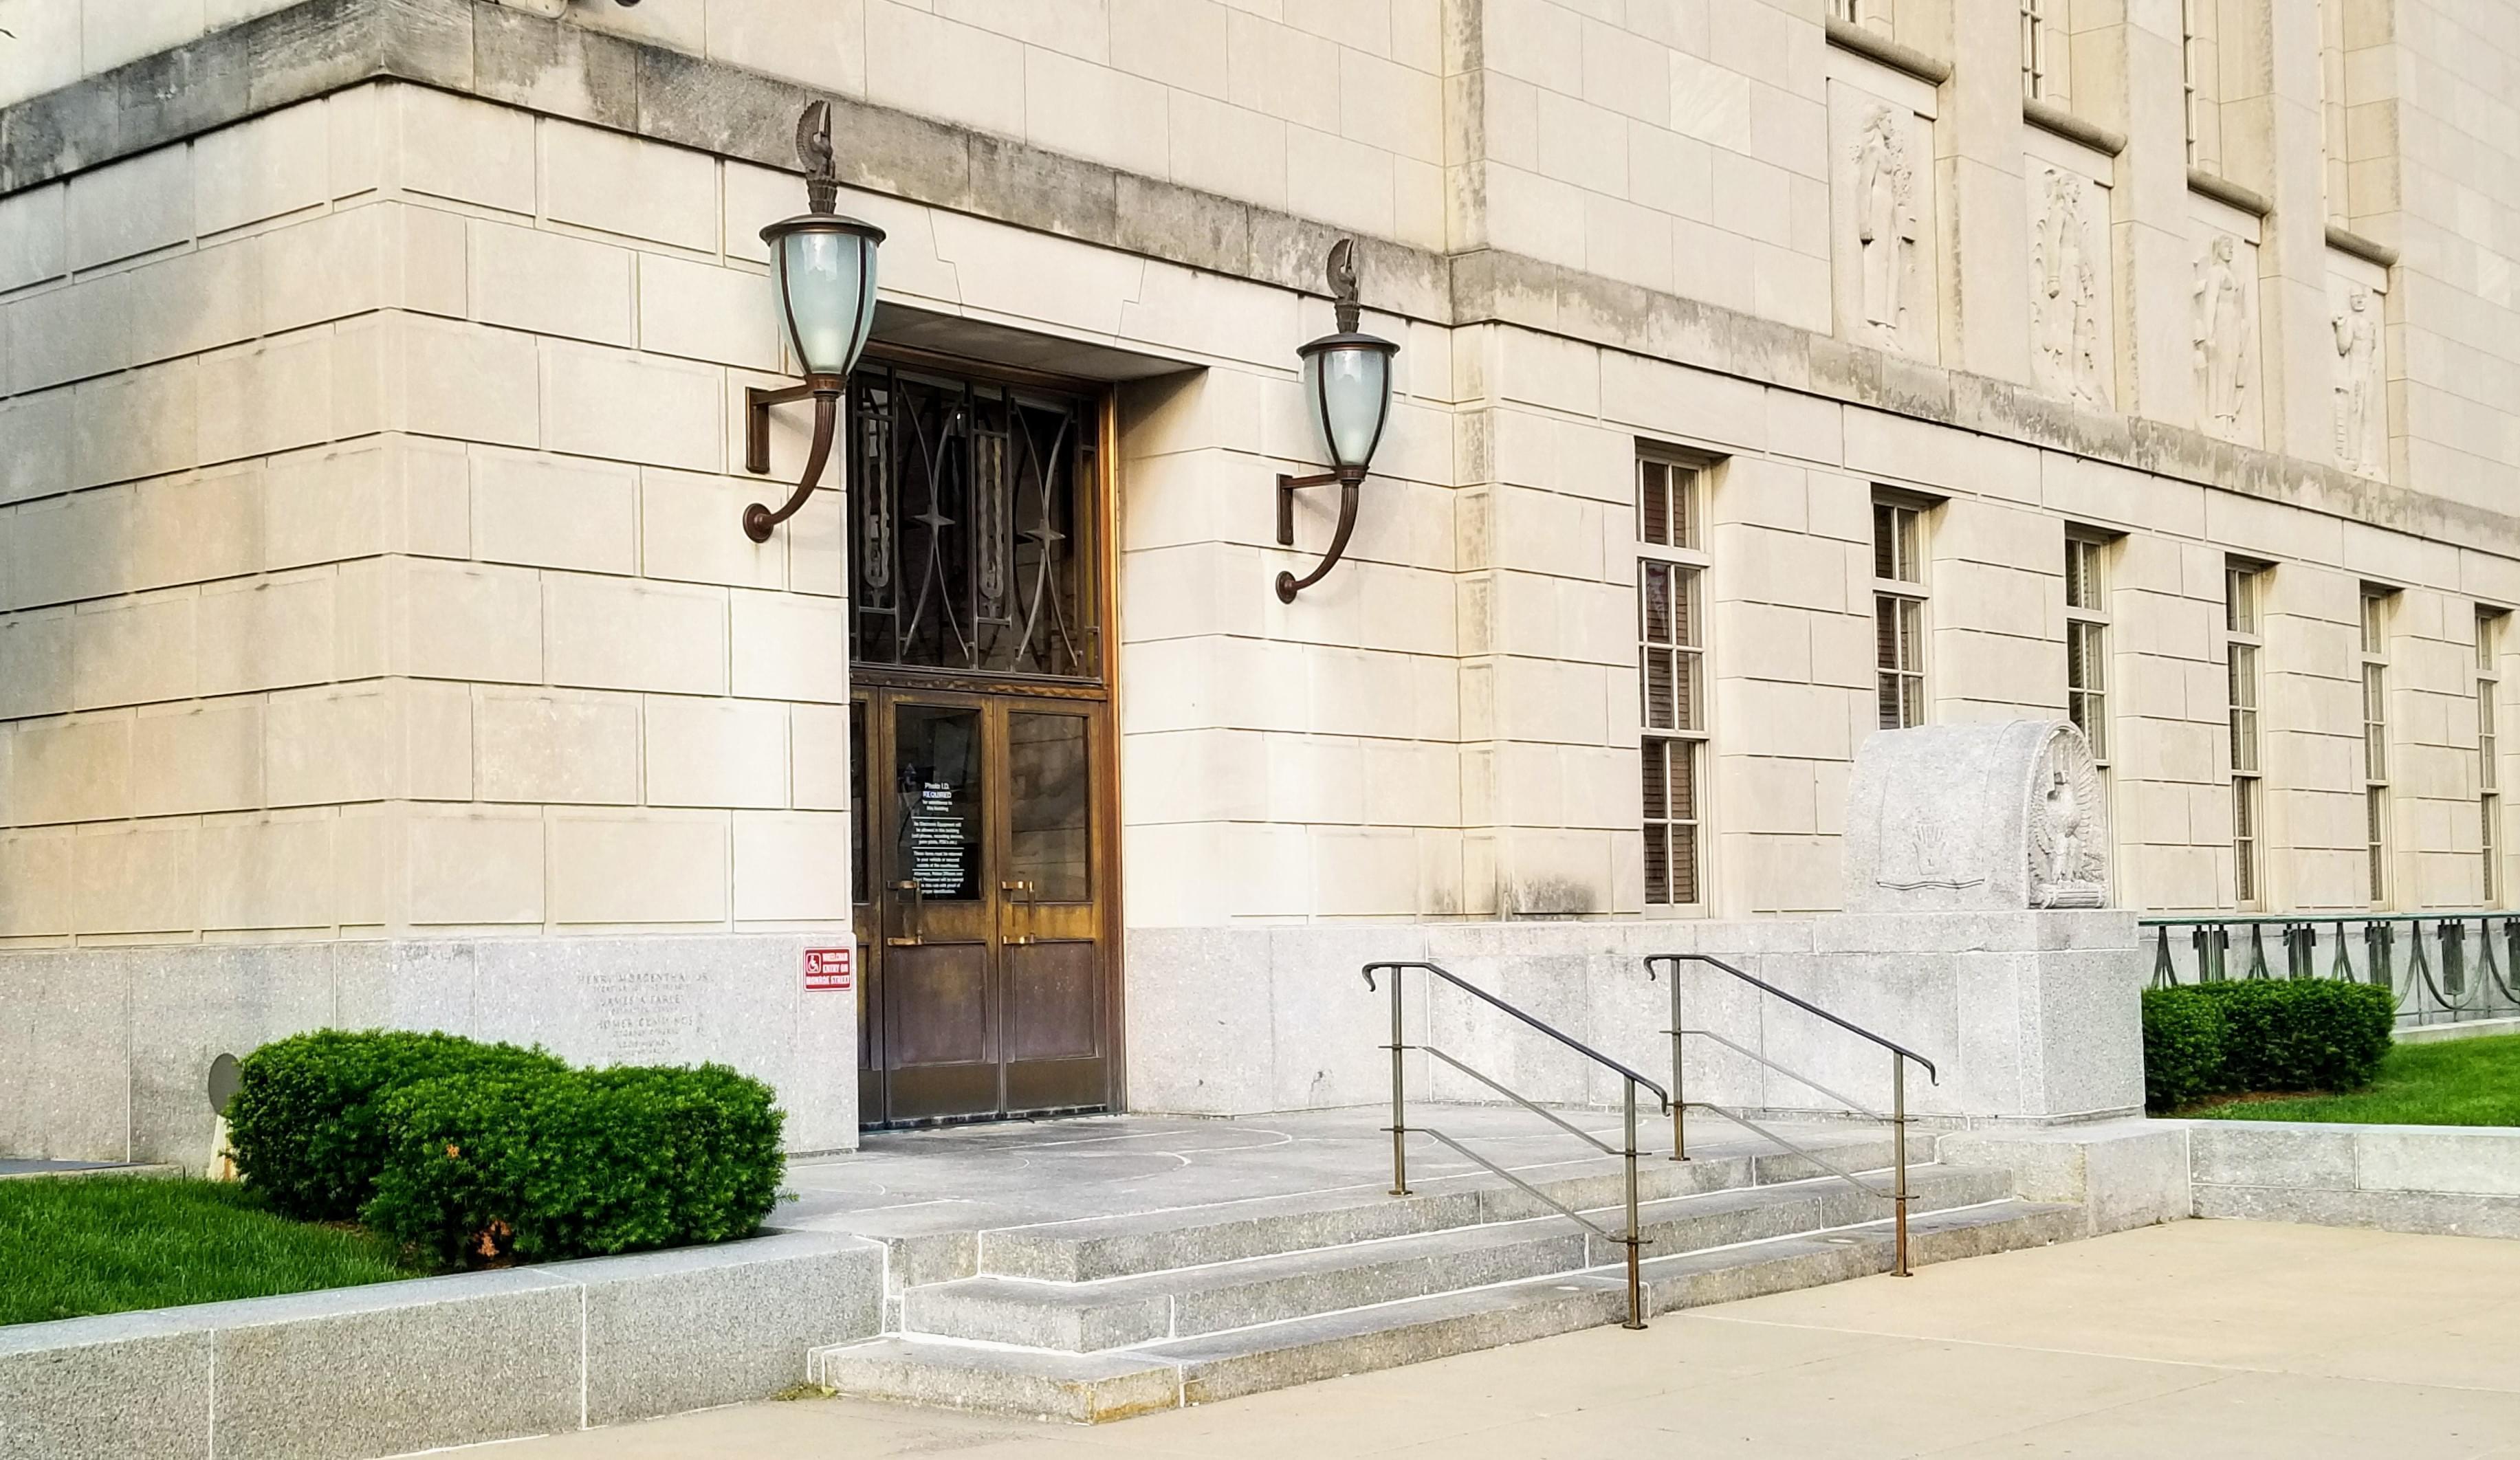 Entrance to the Federal Building and U.S. Courthouse in downtown Peoria.